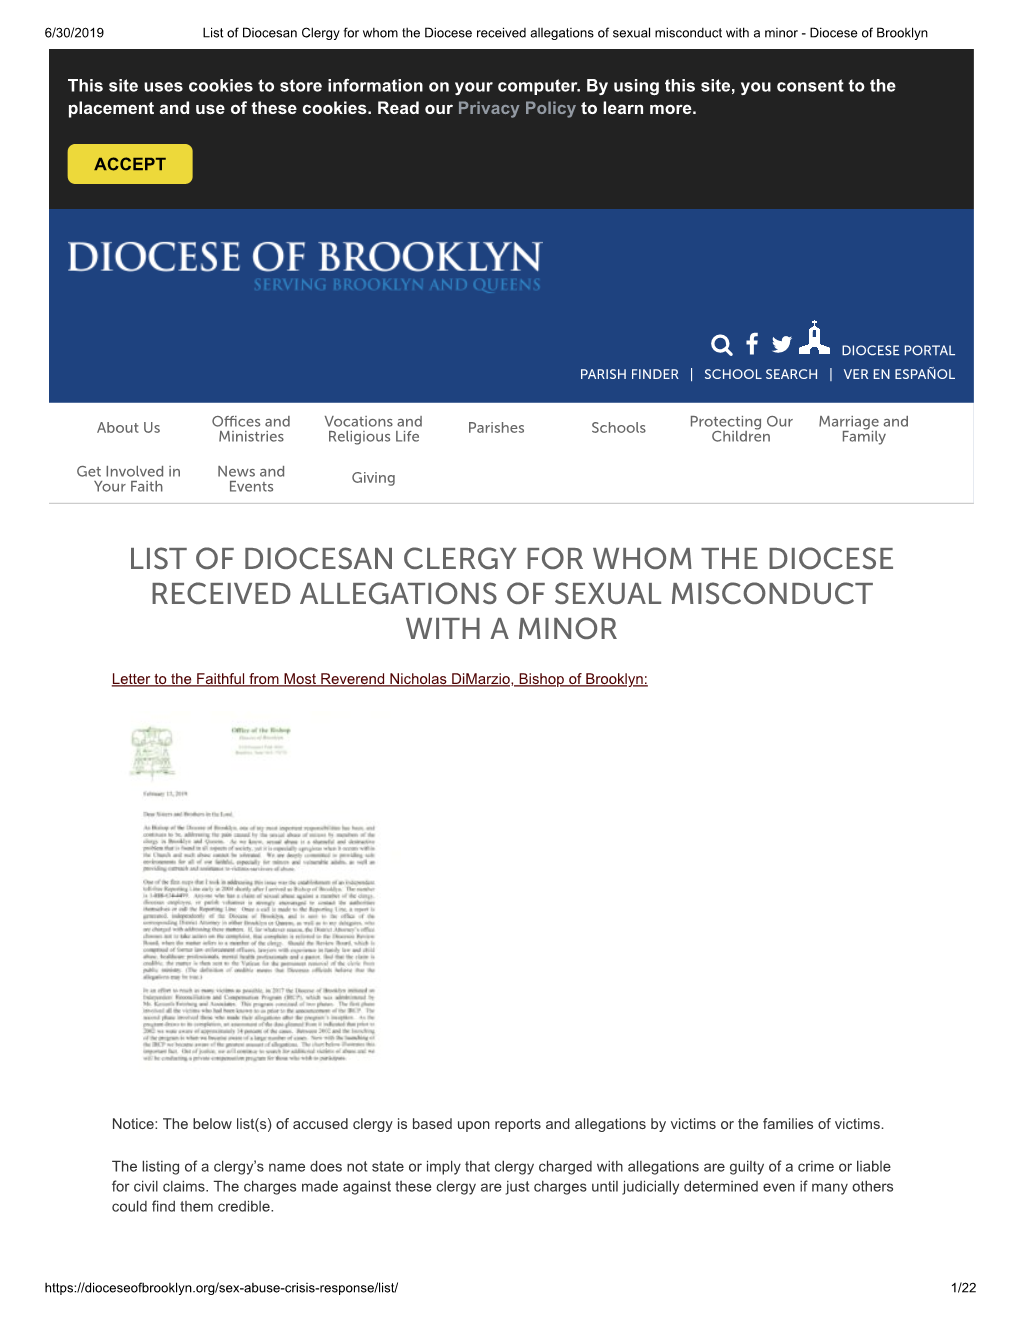 List of Diocesan Clergy for Whom the Diocese Received Allegations of Sexual Misconduct with a Minor - Diocese of Brooklyn